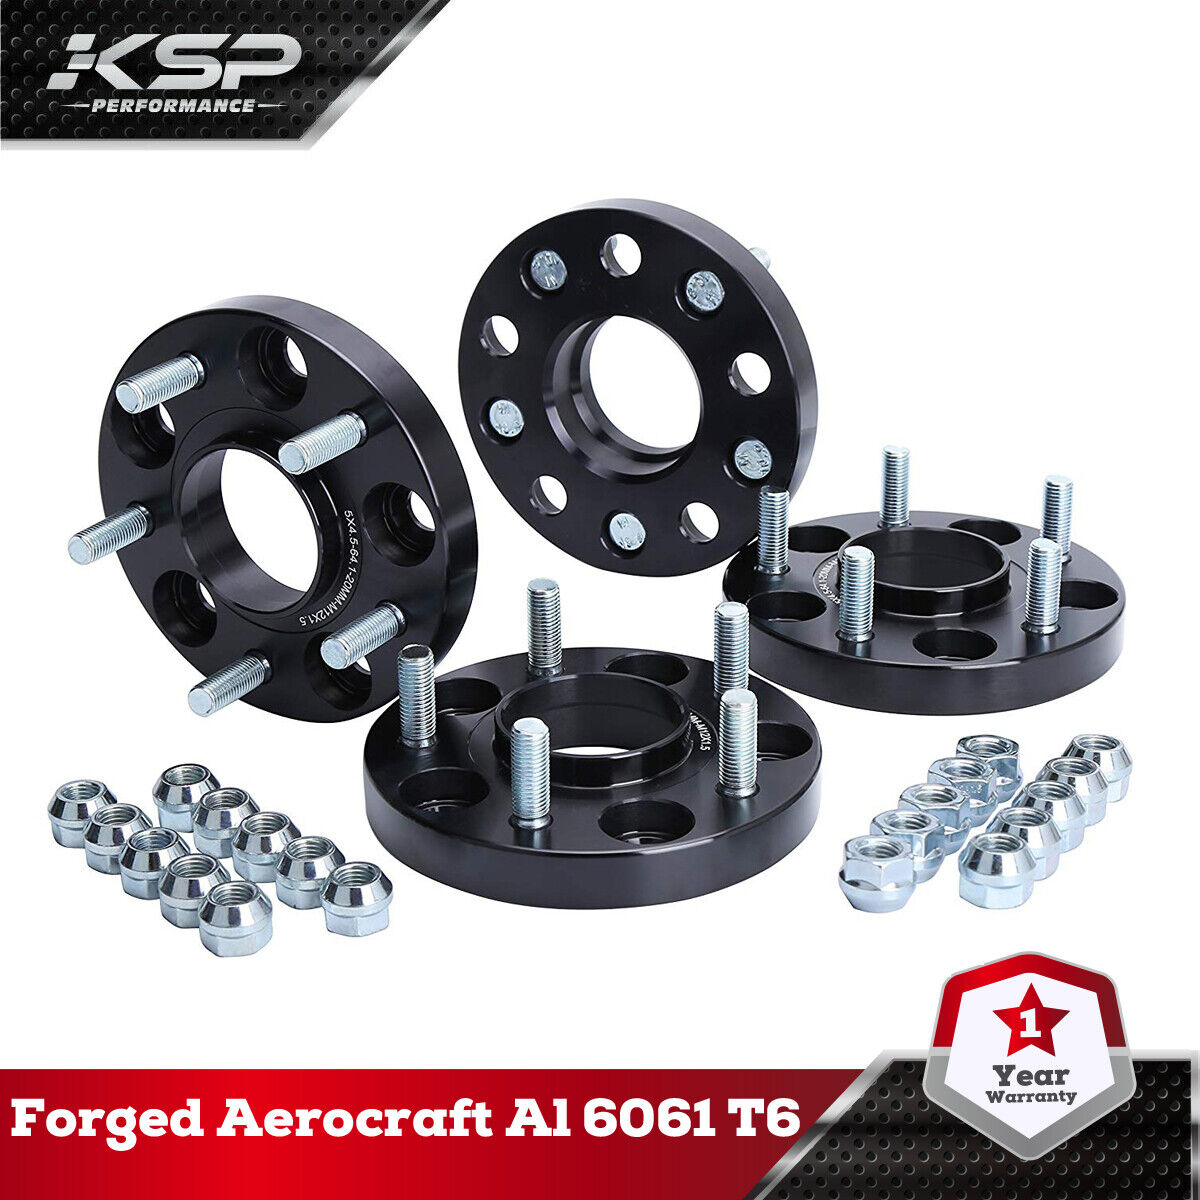 4x 25mm 5x4.5 5x114.3 Wheel Spacers 64.1mm for Honda Civic CR-V Acura CL ILX RSX